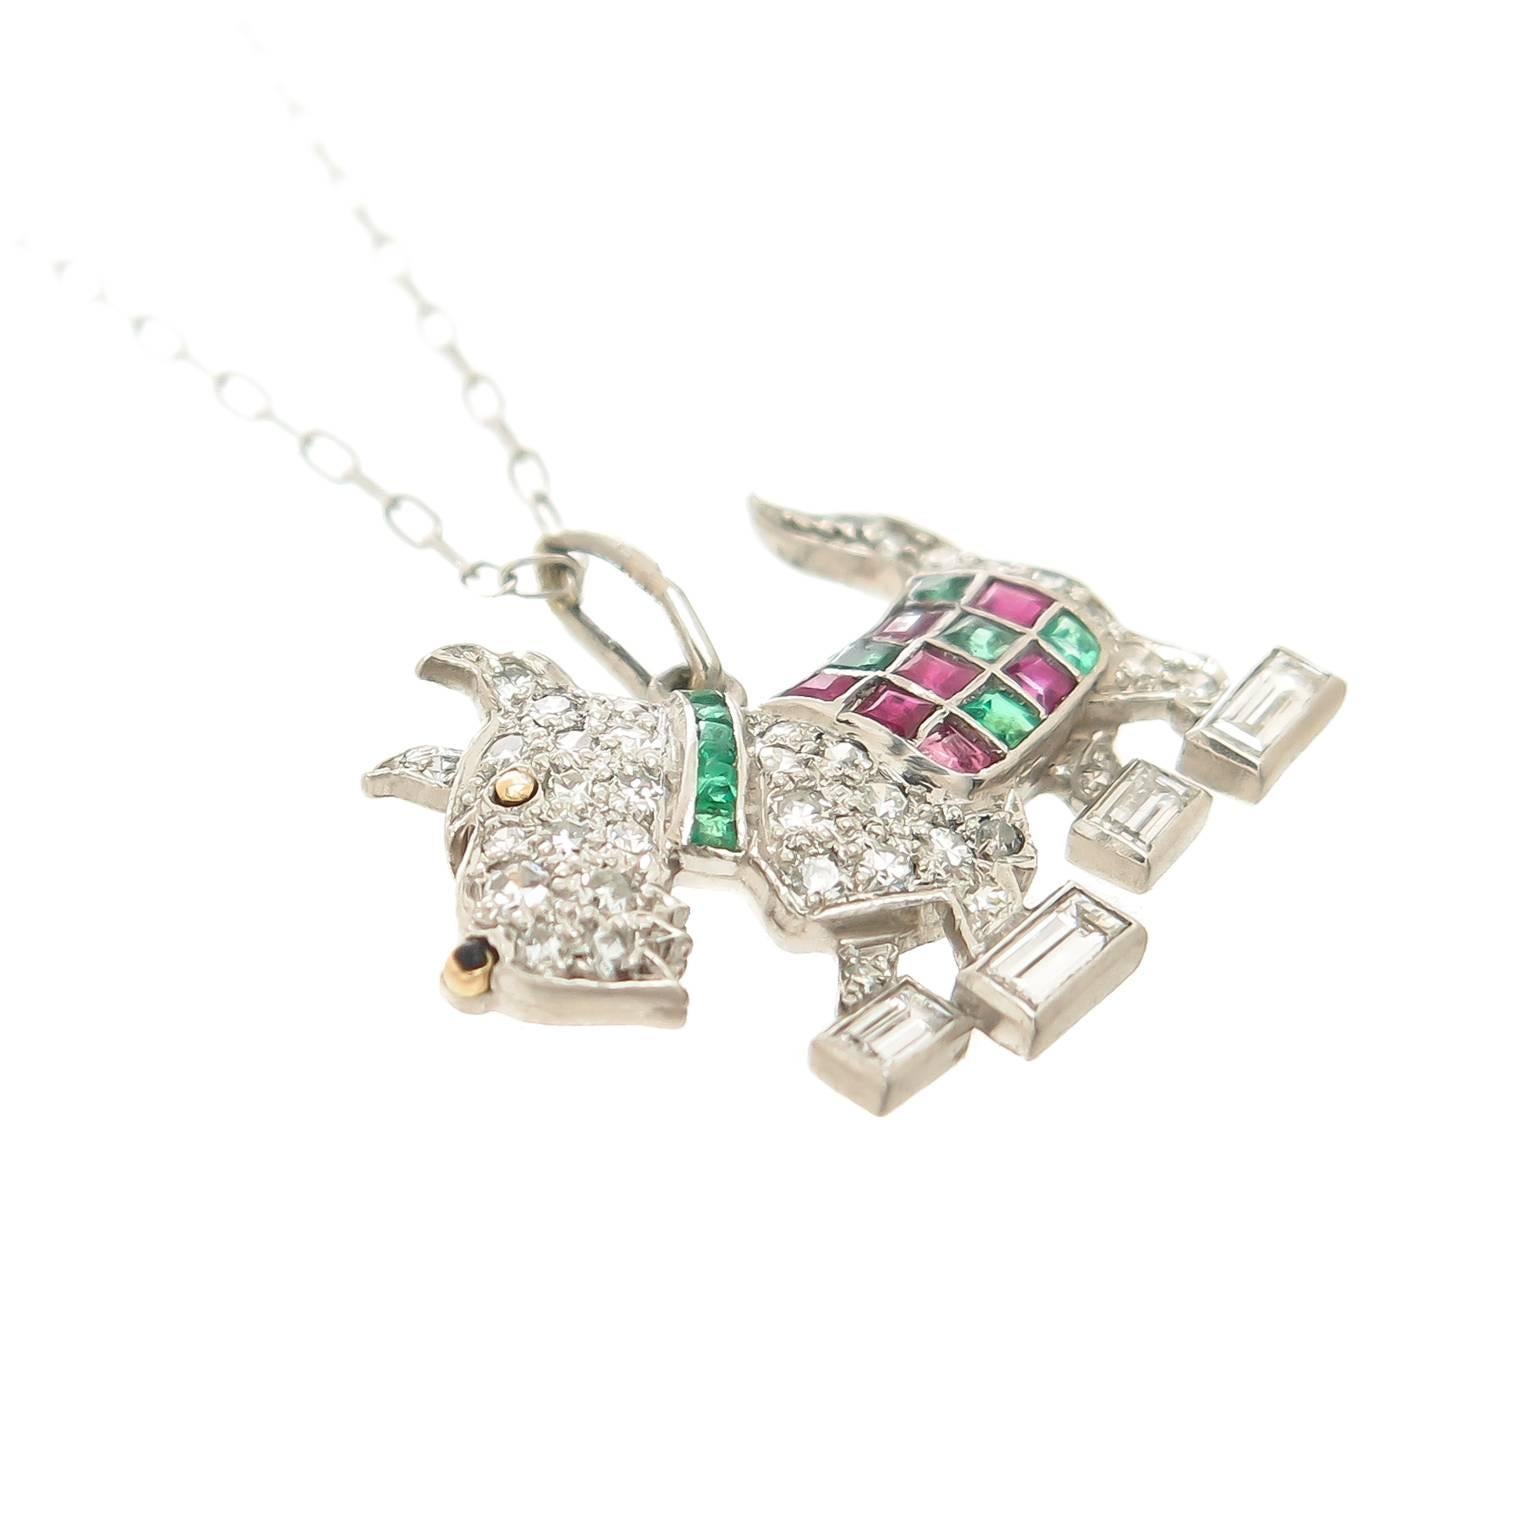 Circa 1930s Platinum, Scottish or west Highland Terrier pendant, set with Round and Fancy cut Diamonds and square cut Emeralds and Rubies. measuring 3/4 inch in length and 5/8 inch in height. Suspended from an 18 inch Platinum chain.